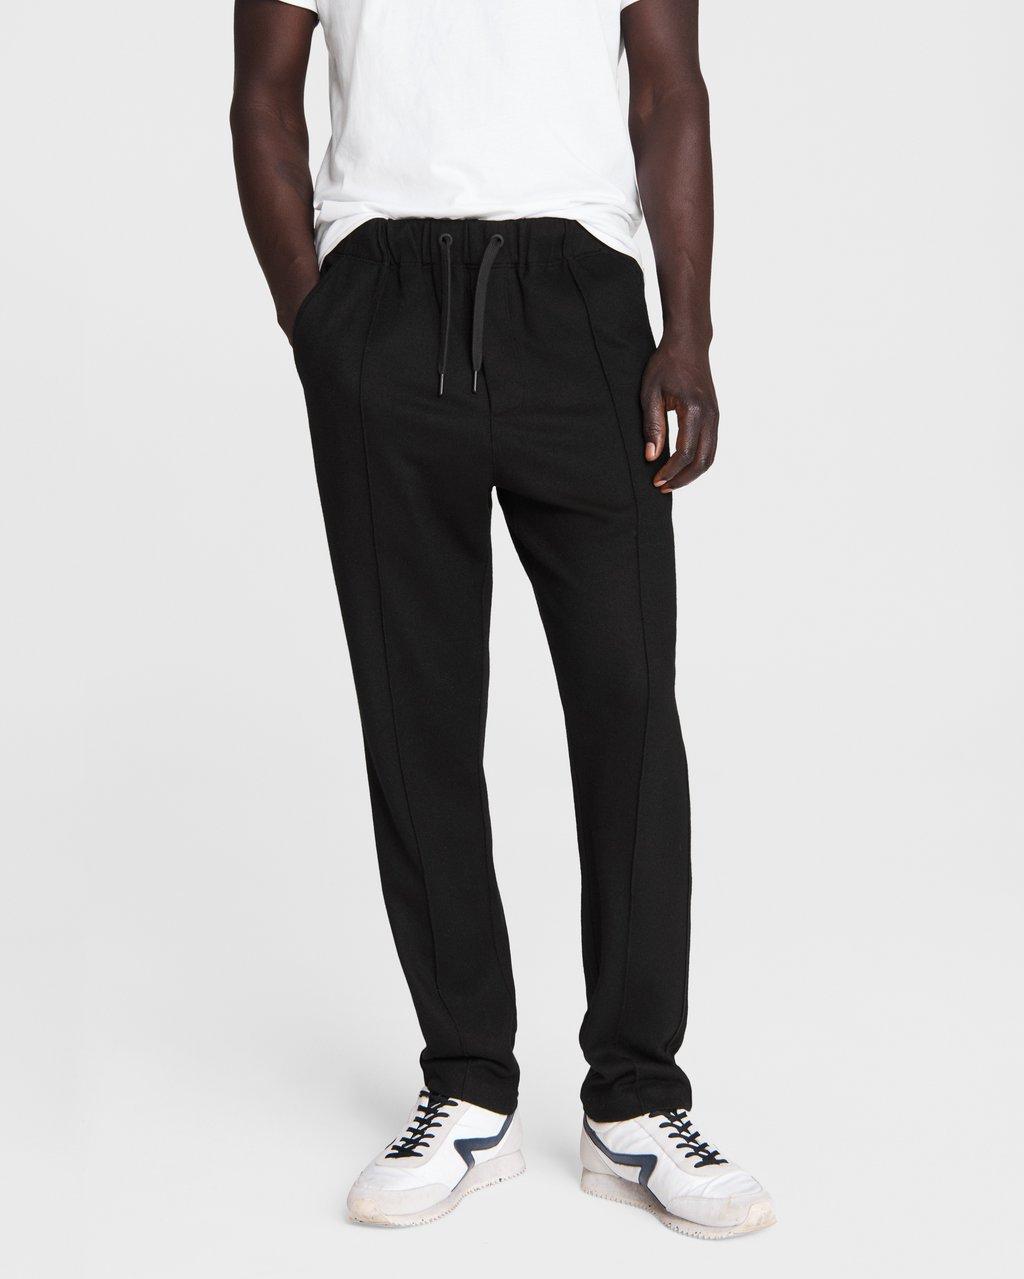 Andrew Japanese Wool Knit Pant